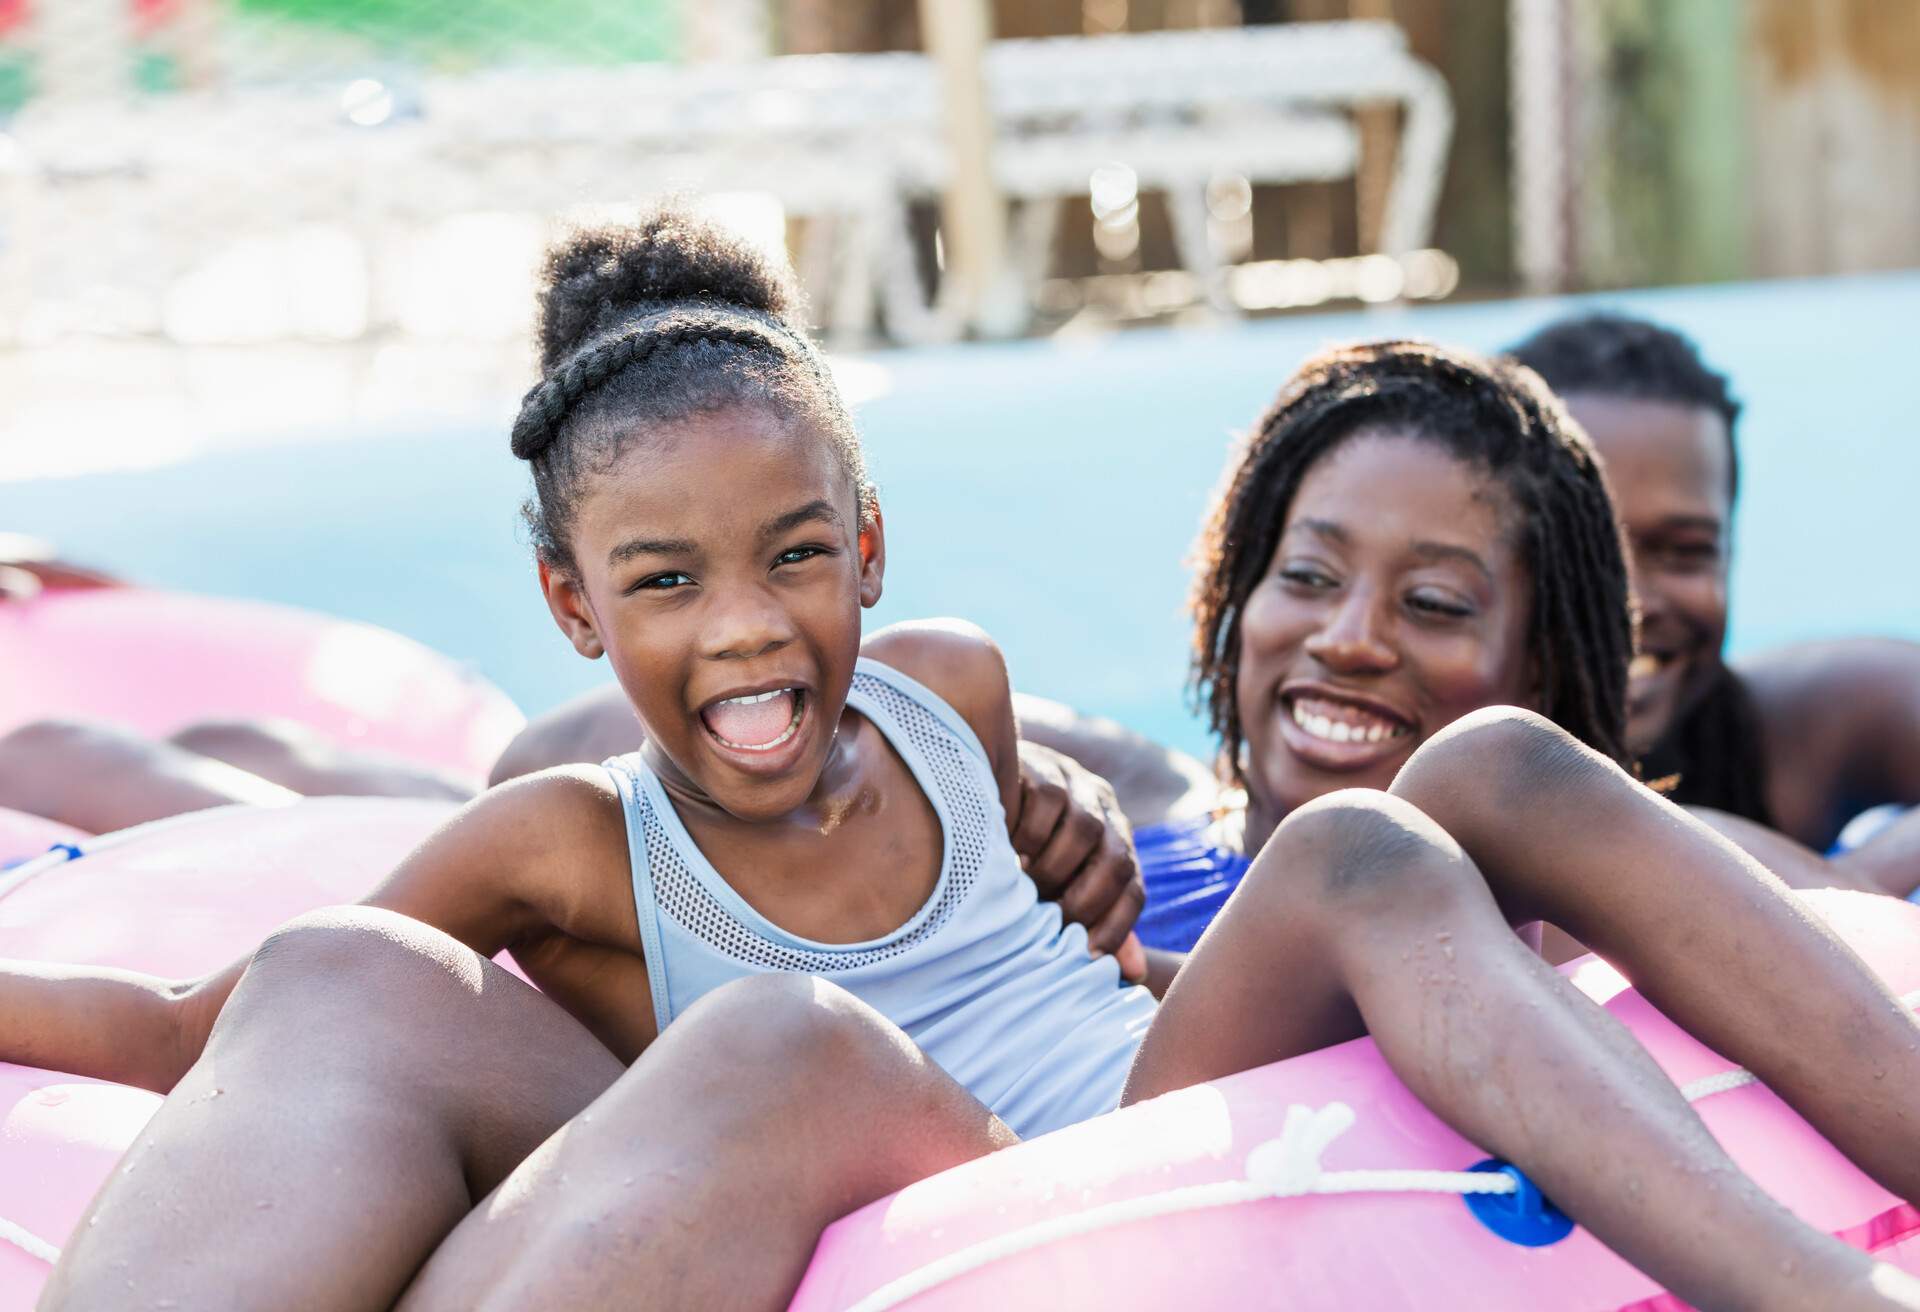 A 6 year old African-American girl having fun at a water park. She and her mother are sitting on an inflatable ring together, floating down a lazy river. She is shouting and laughing, looking at the camera.